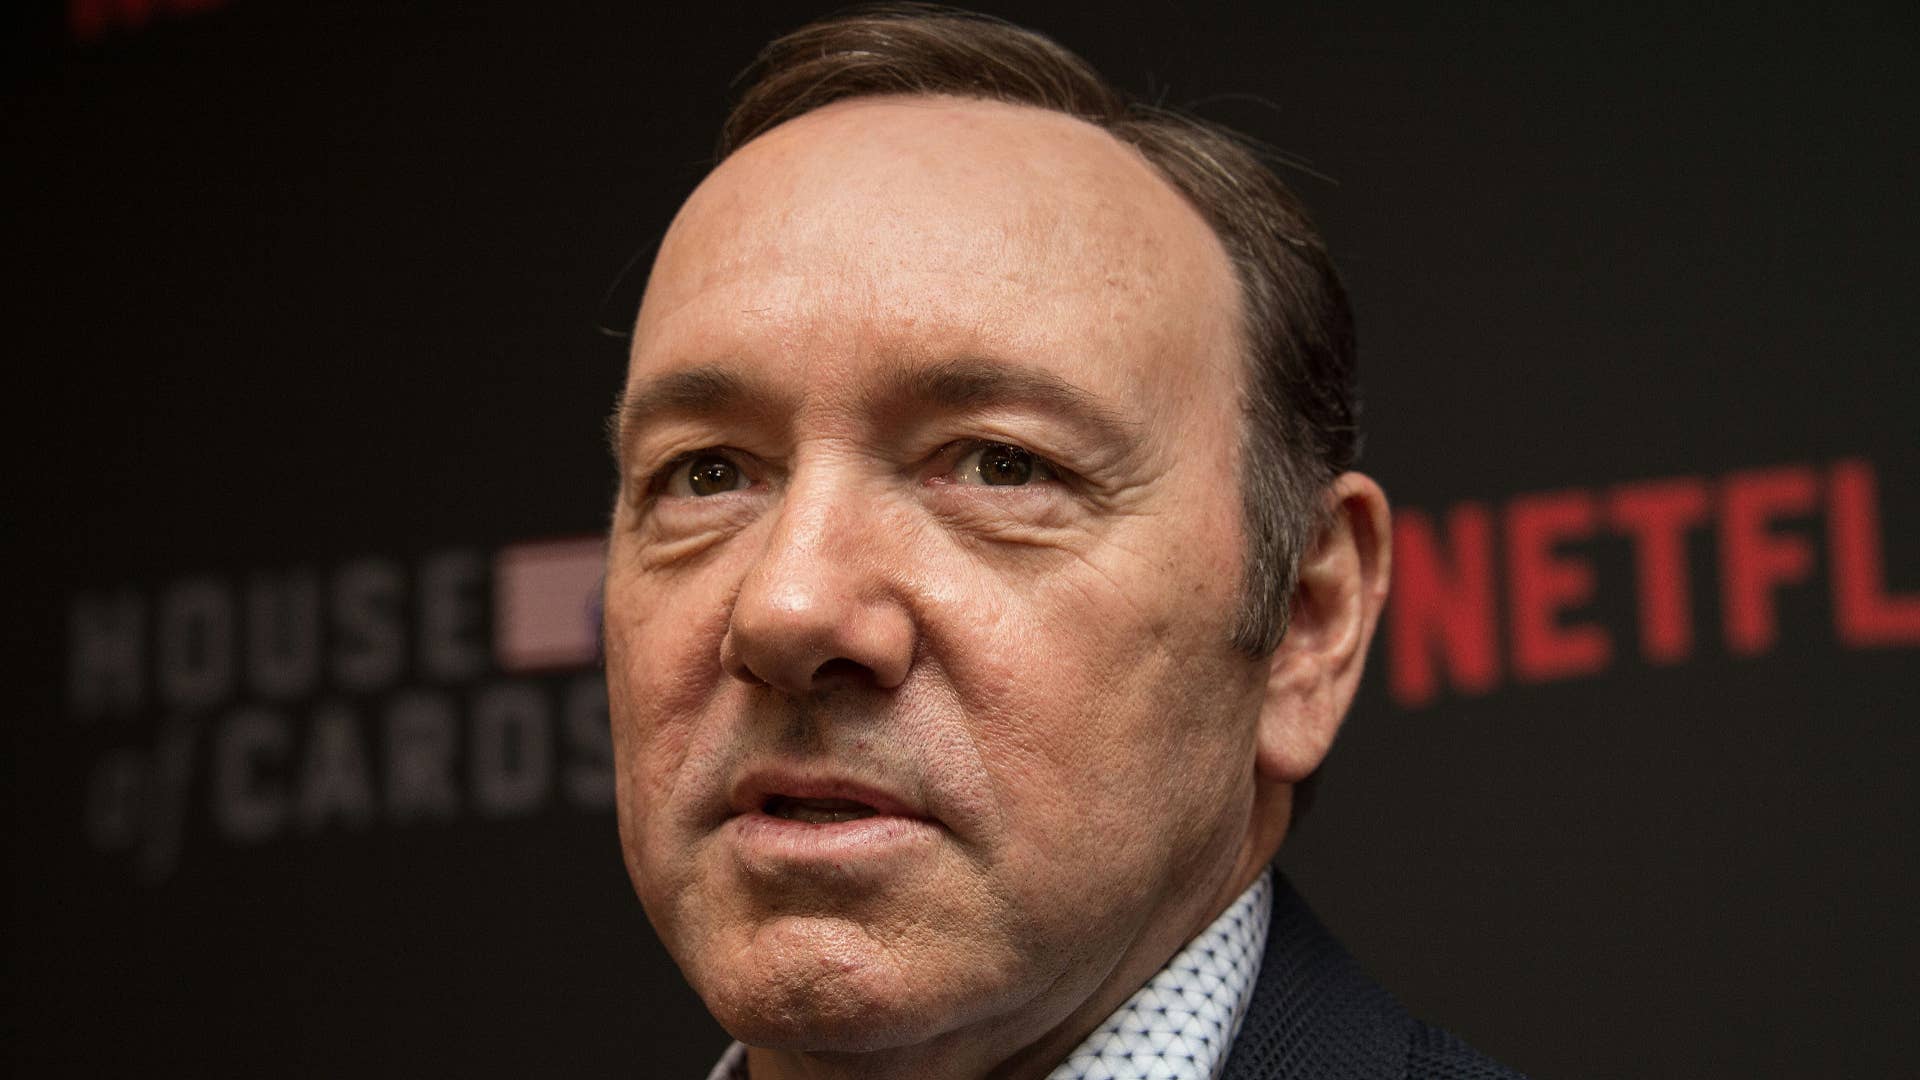 Kevin Spacey attends 'House of Cards' premiere screening.